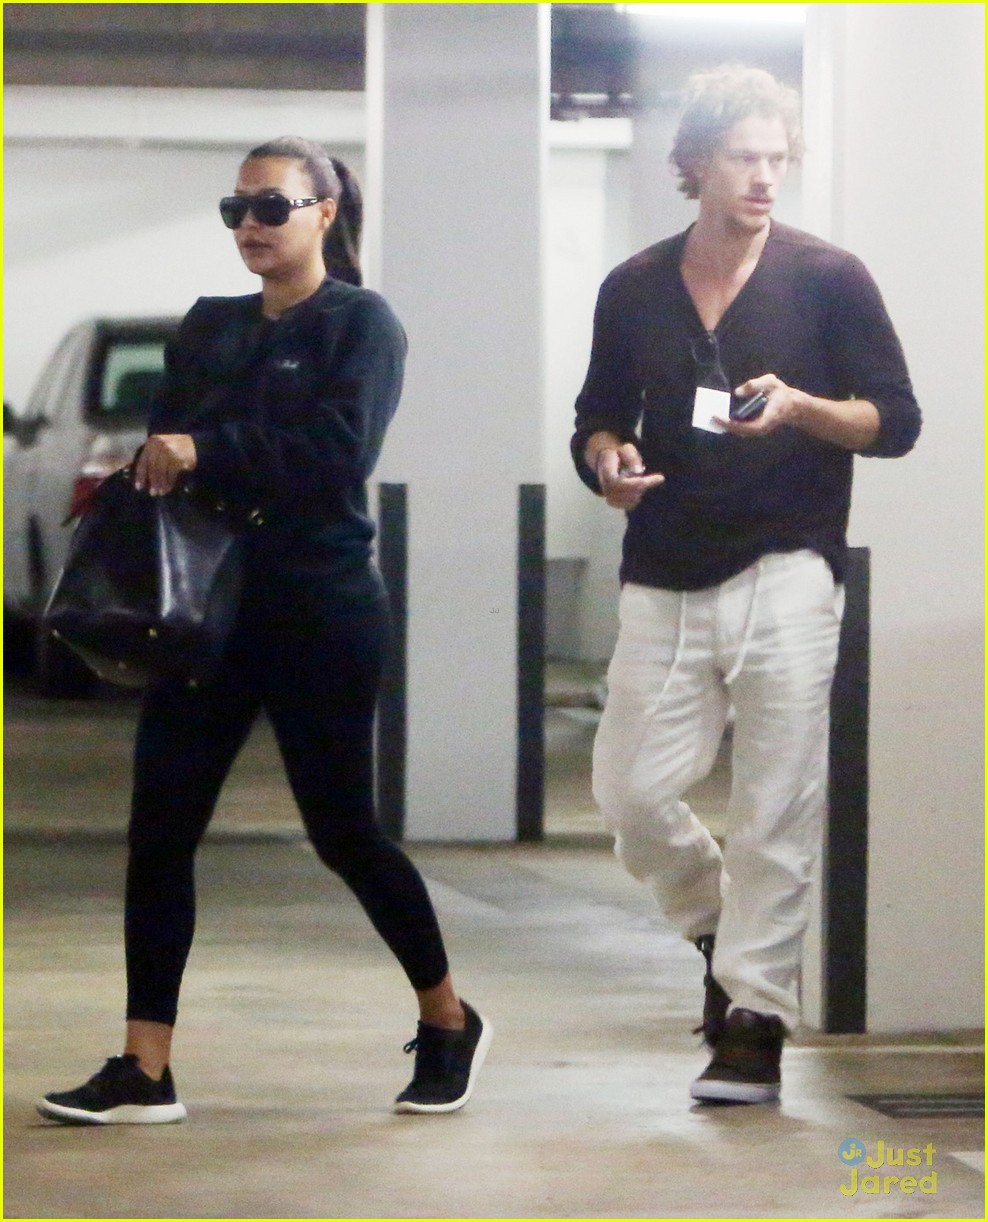 naya rivera steps out for baby checkup with ryan dorsey 01